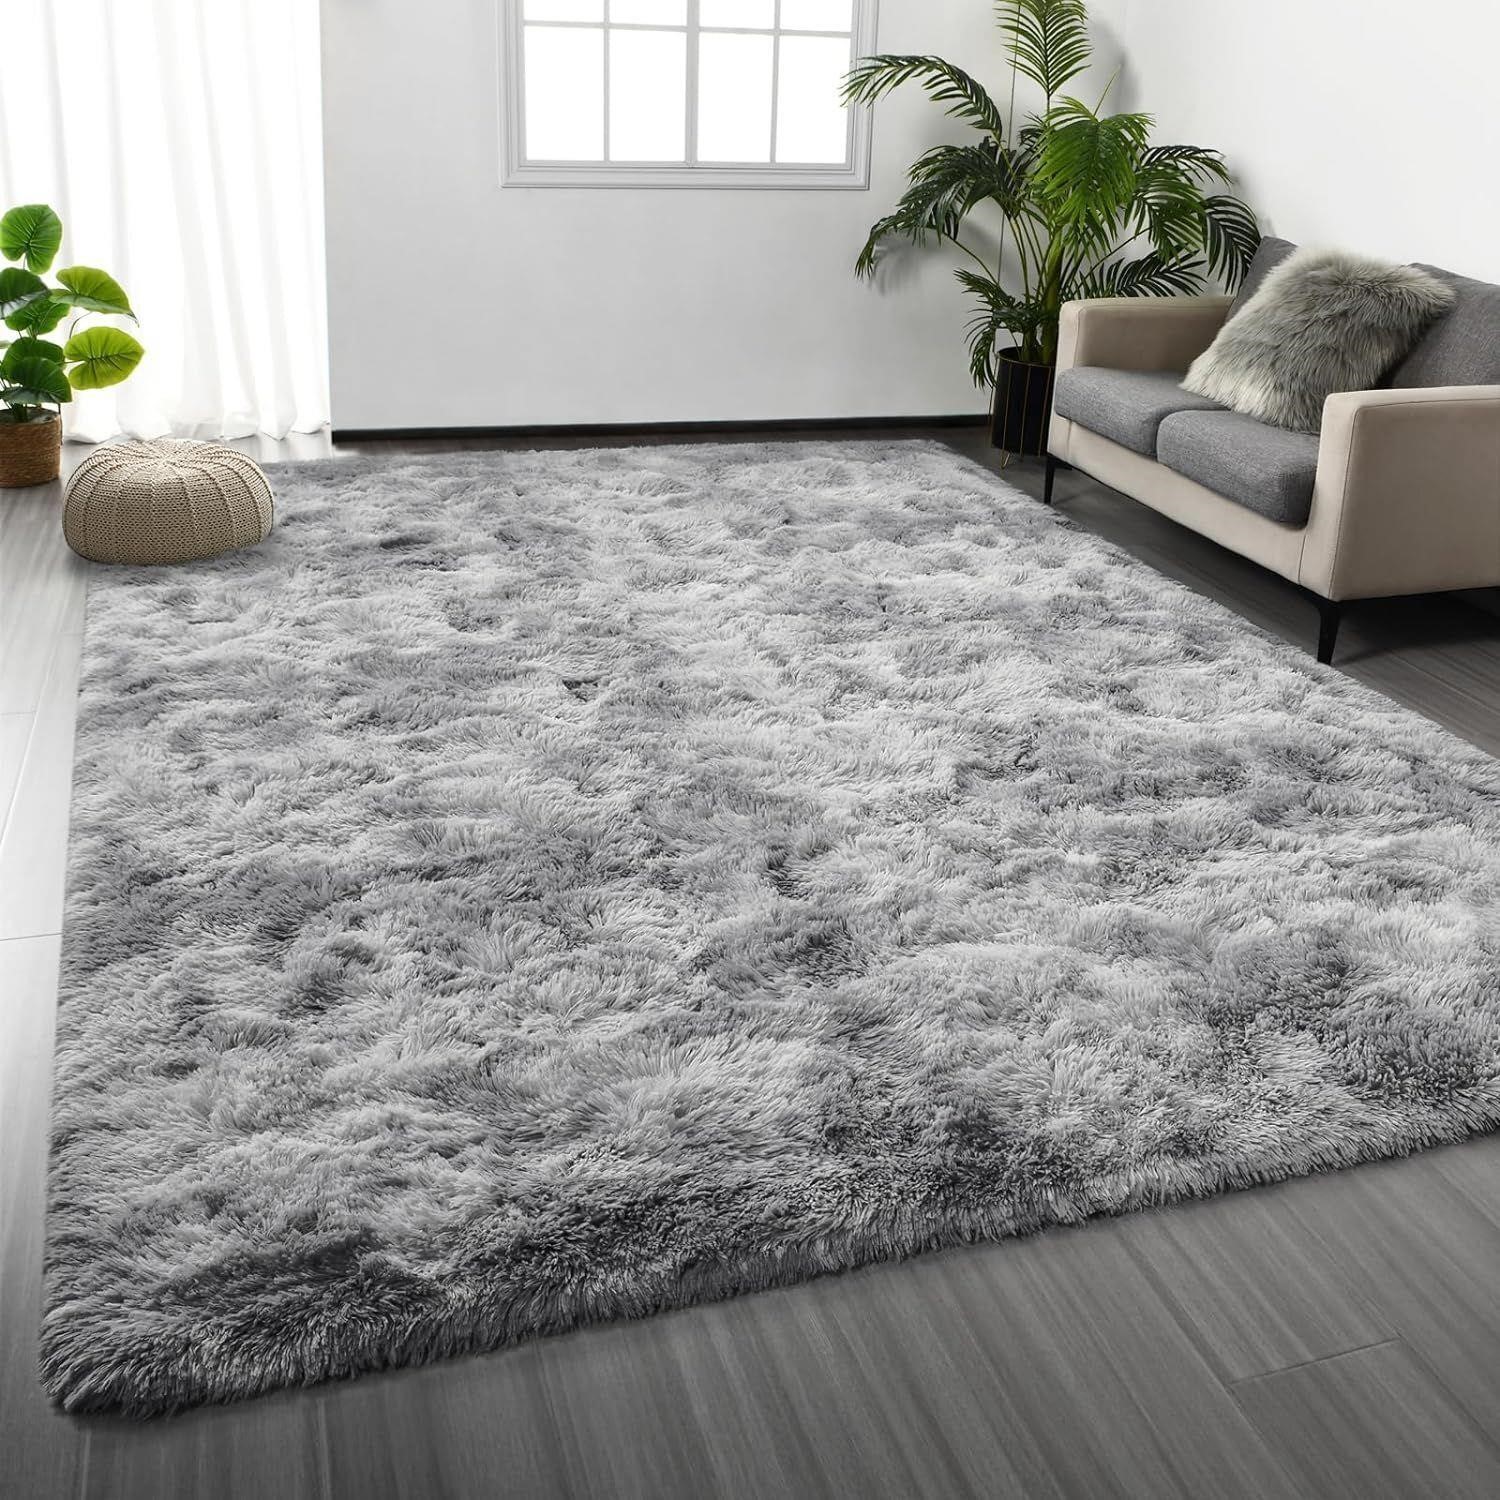 Large Shag Area Rugs 6 x 9, Tie-Dyed Light Grey